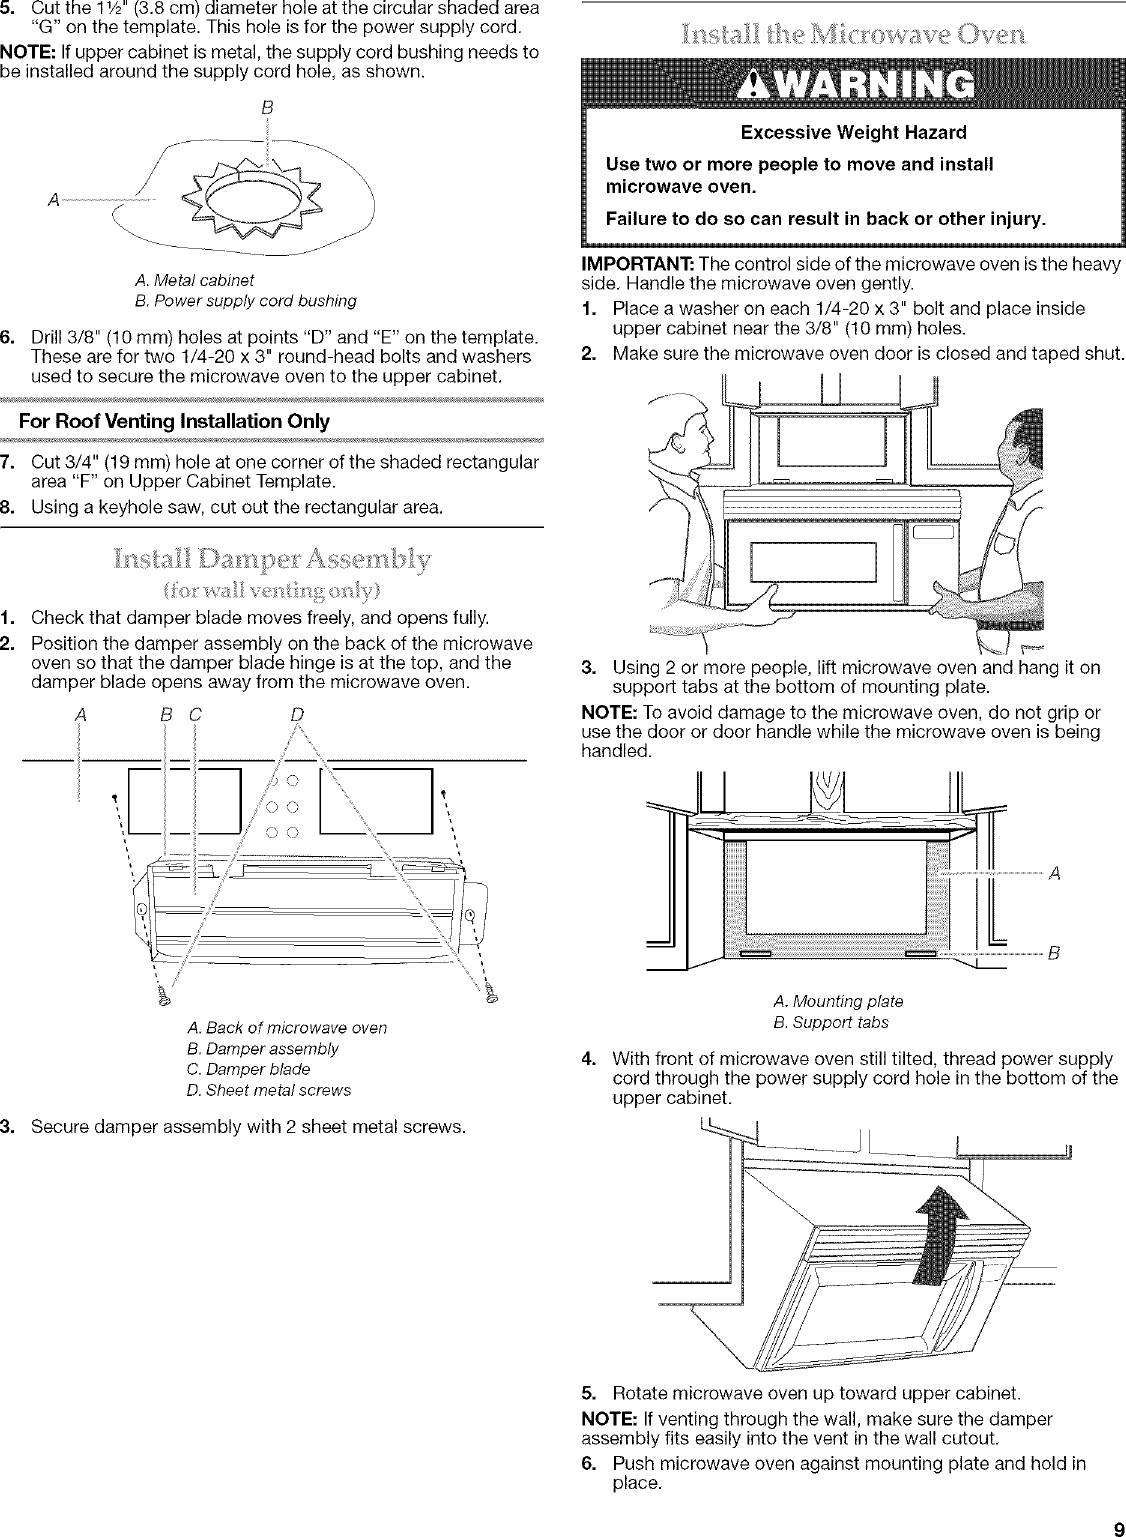 Page 9 of 12 - Kitchenaid KHMS1850SSS0 User Manual  MICROWAVE HOOD COMBO - Manuals And Guides L0705146